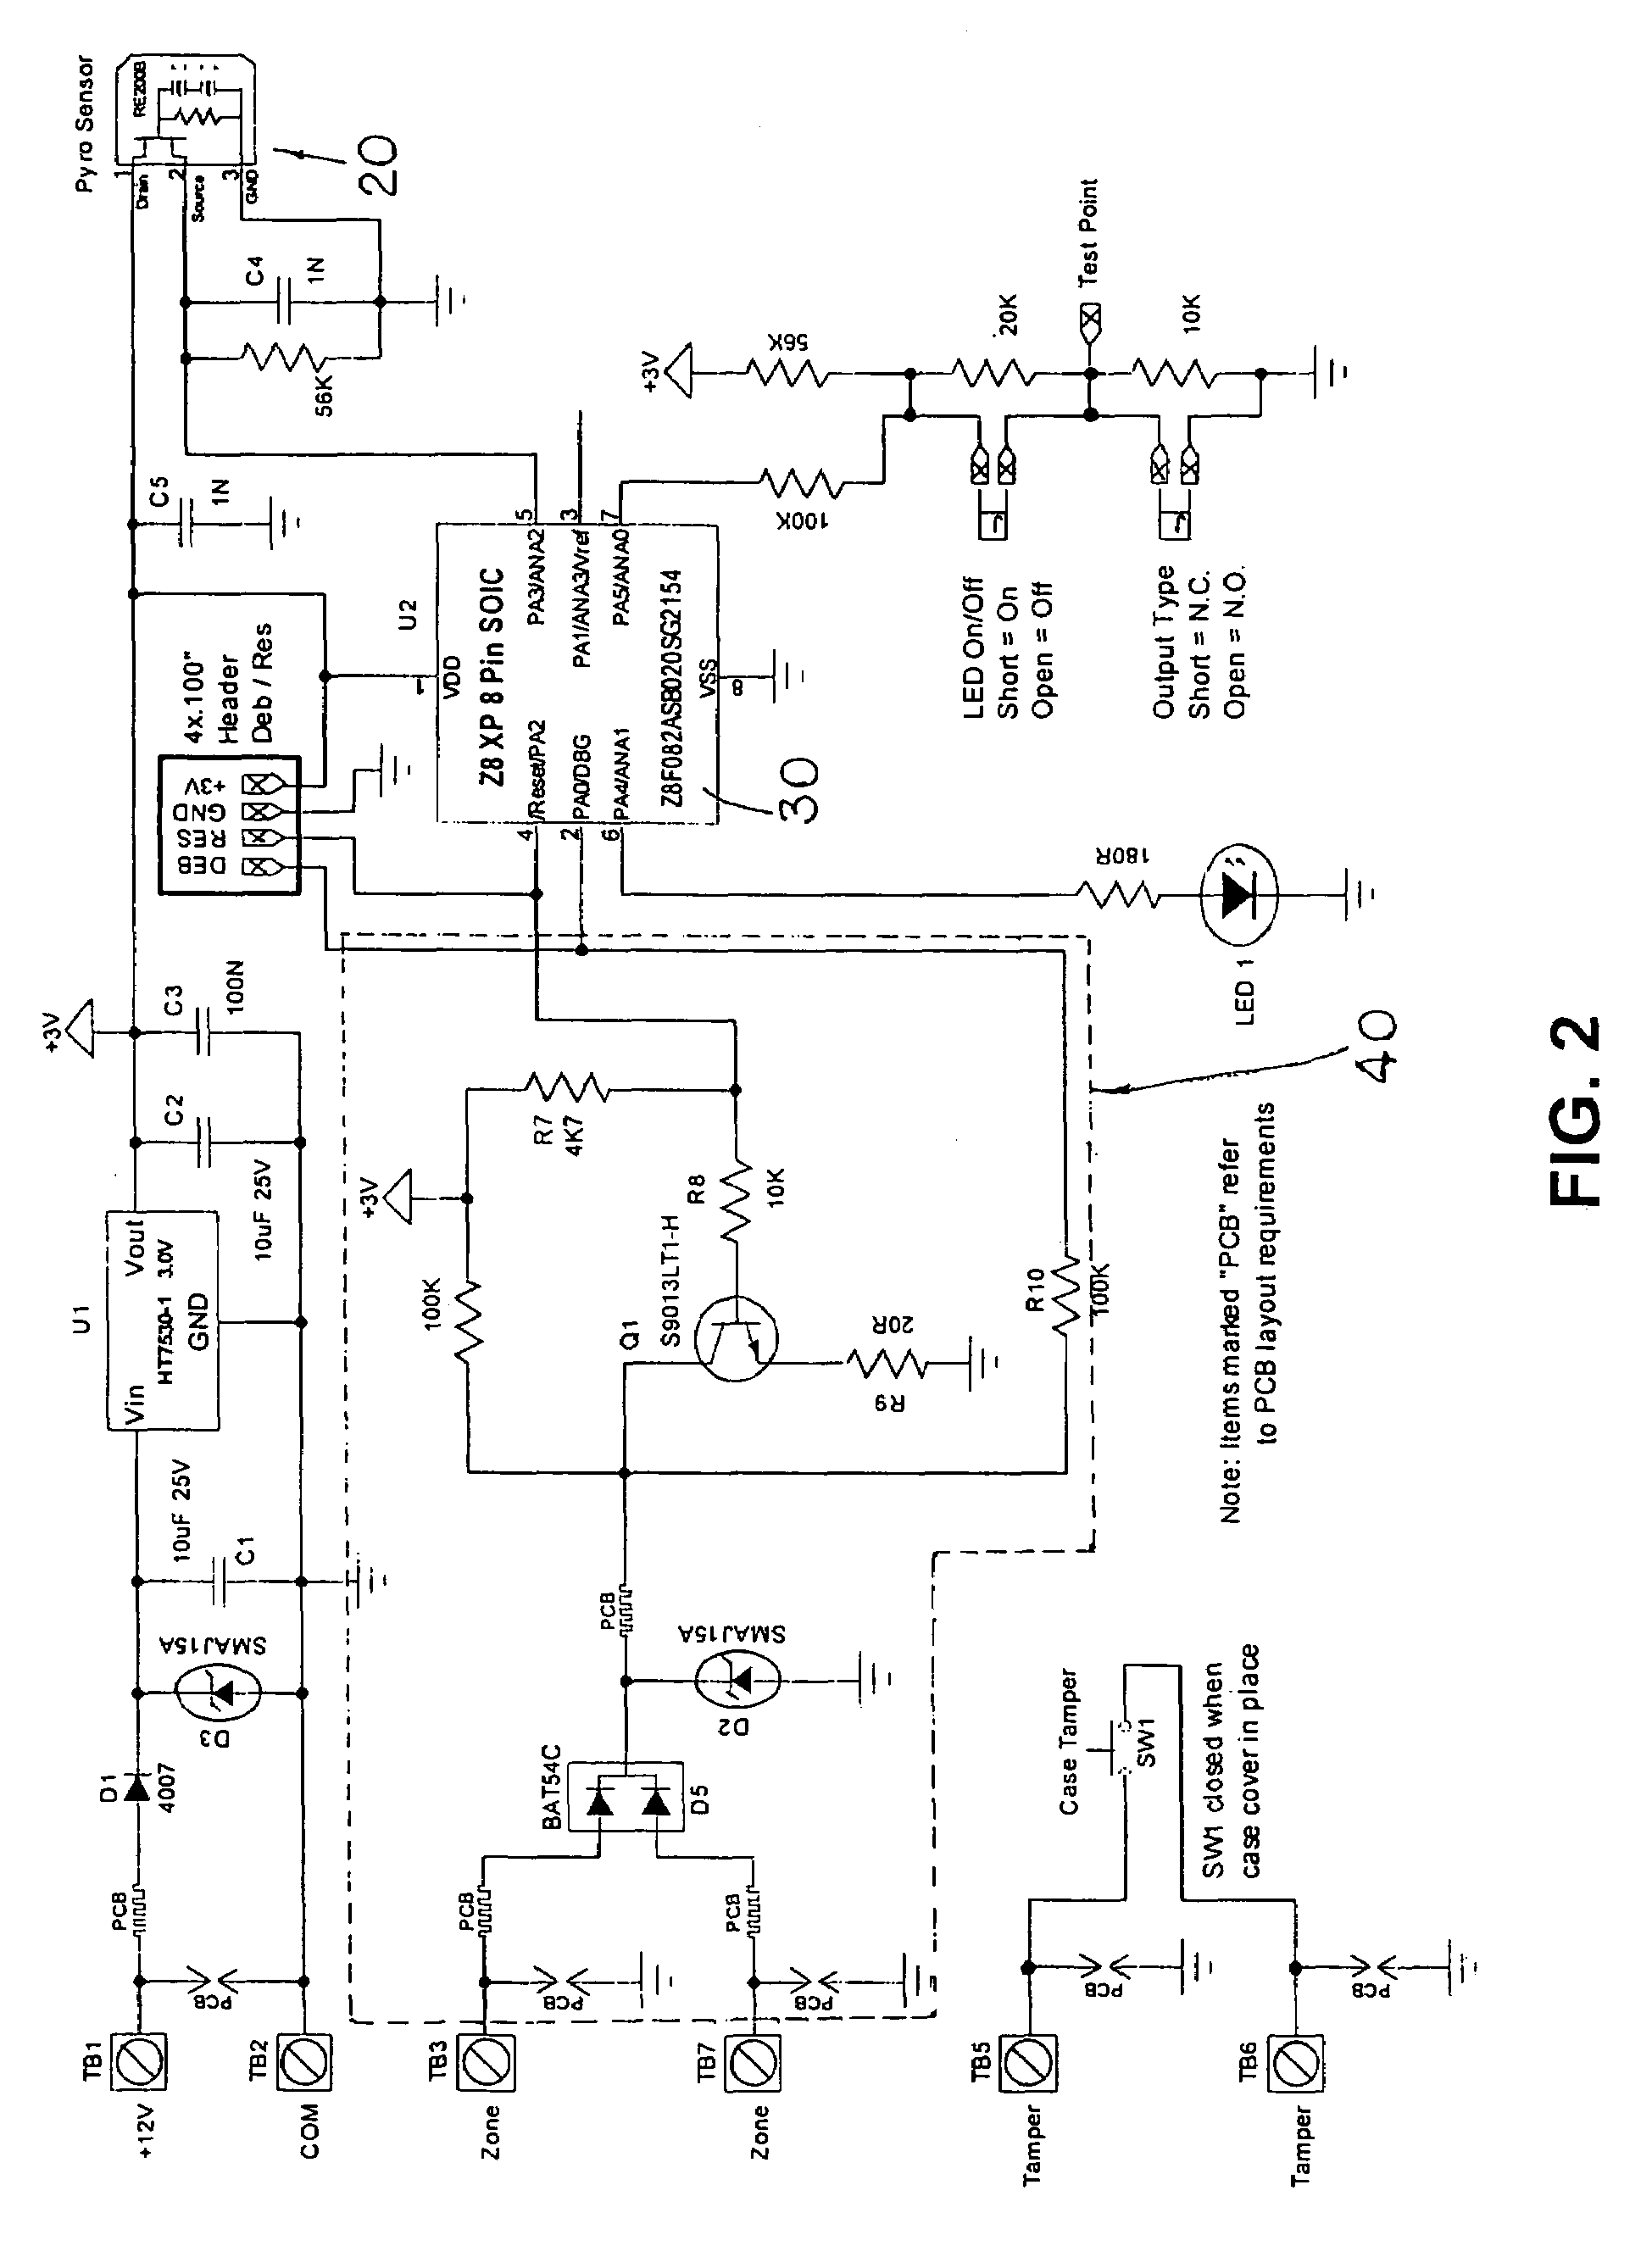 Process and system of energy signal detection